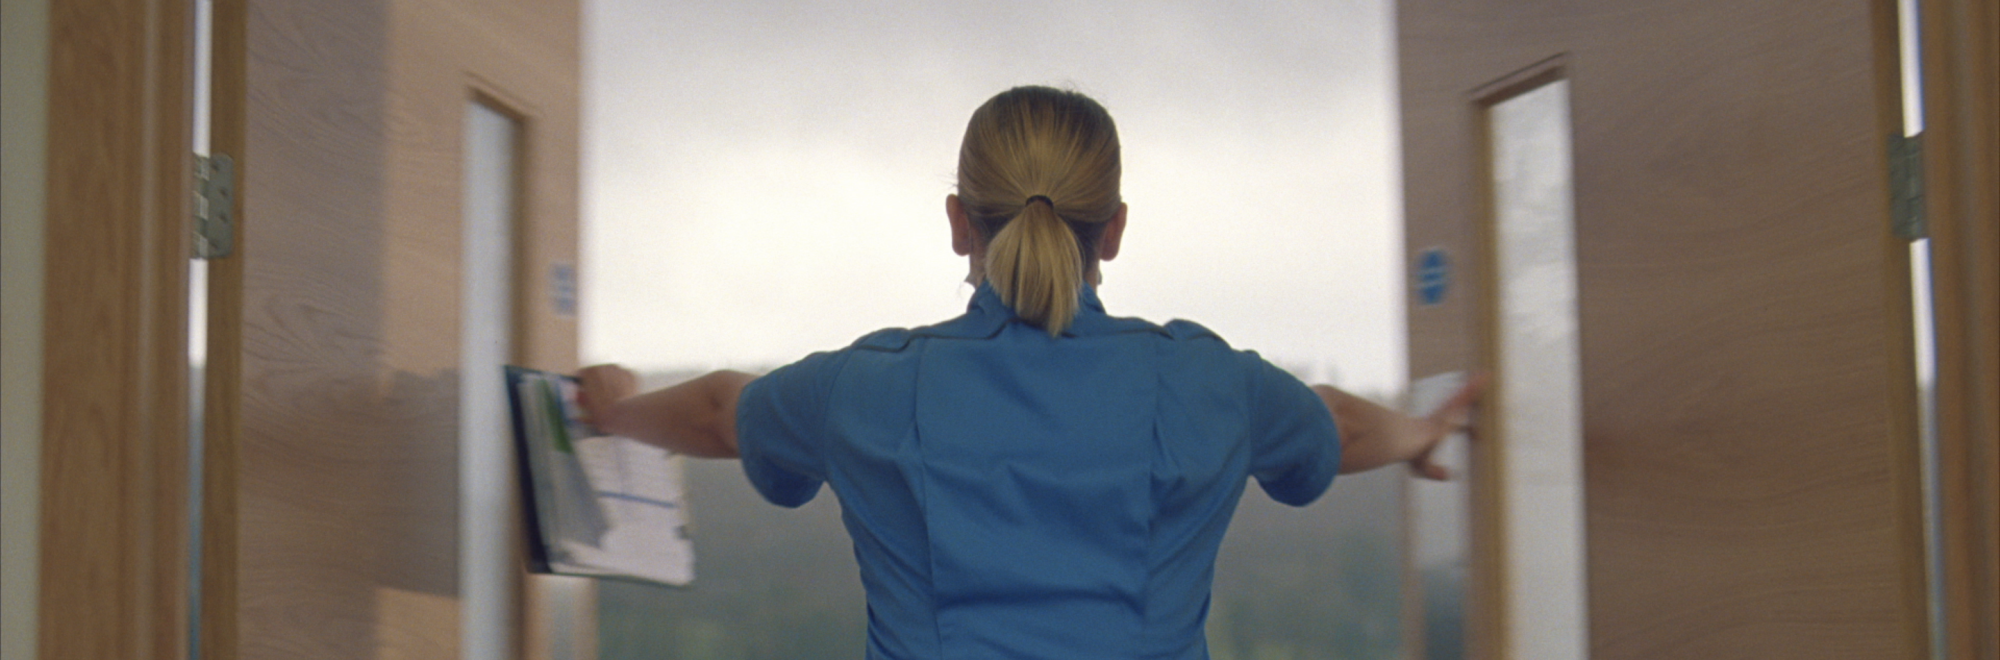 M&C Saatchi campaign for Spire Healthcare opens the door to what really matters to patients